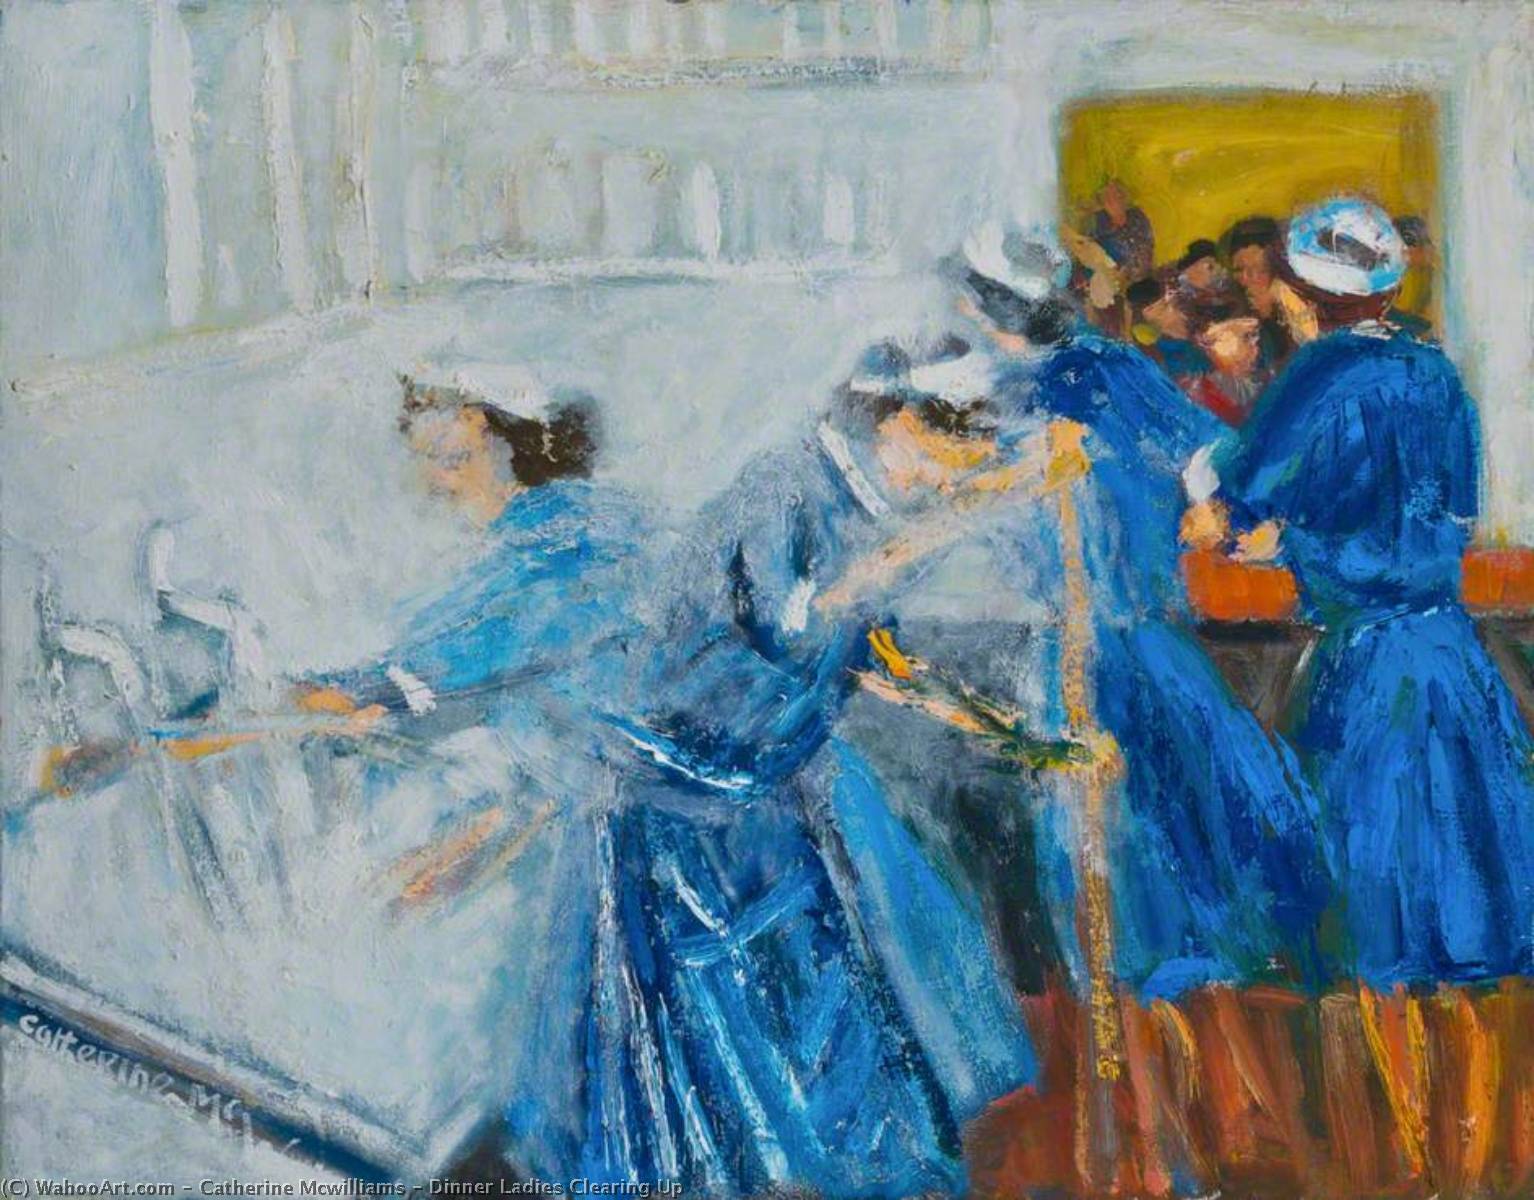 Dinner Ladies Clearing Up by Catherine Mcwilliams Catherine Mcwilliams | ArtsDot.com